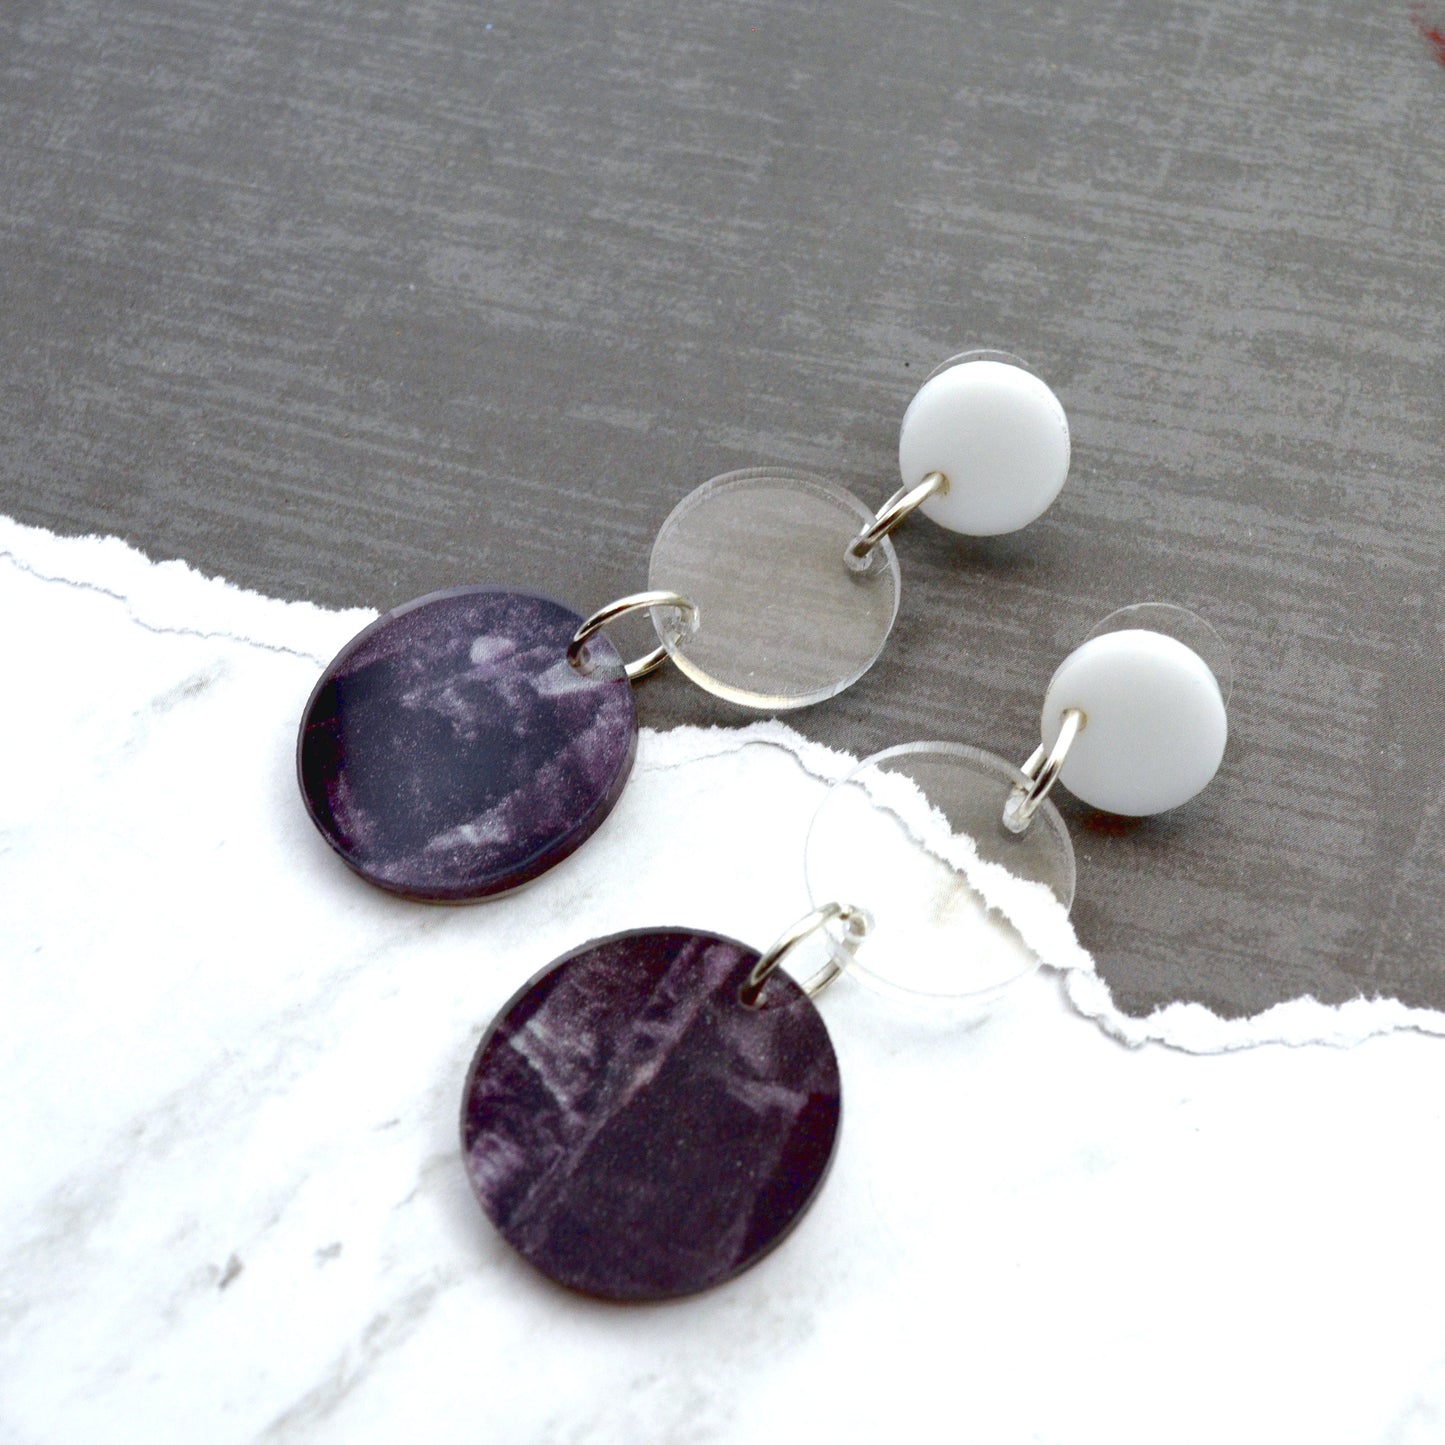 SALE Amethyst Marble Drop Dangles - Post Earrings - Laser Cut Acrylic - Geometric Glam Collection